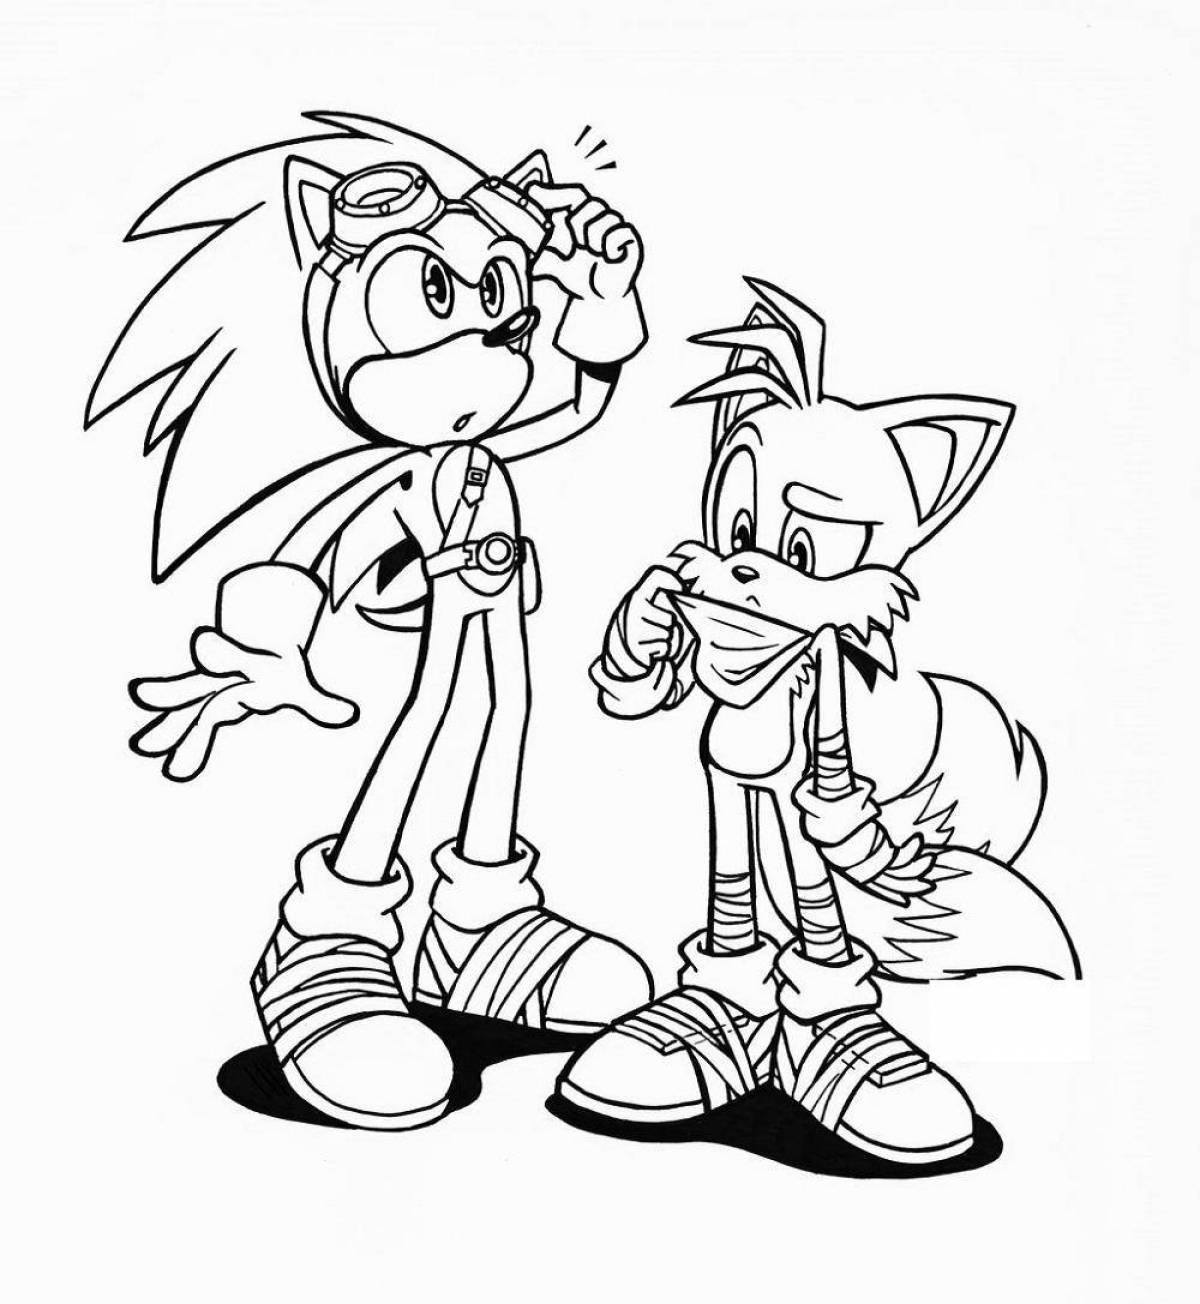 Outstanding sonic theos coloring